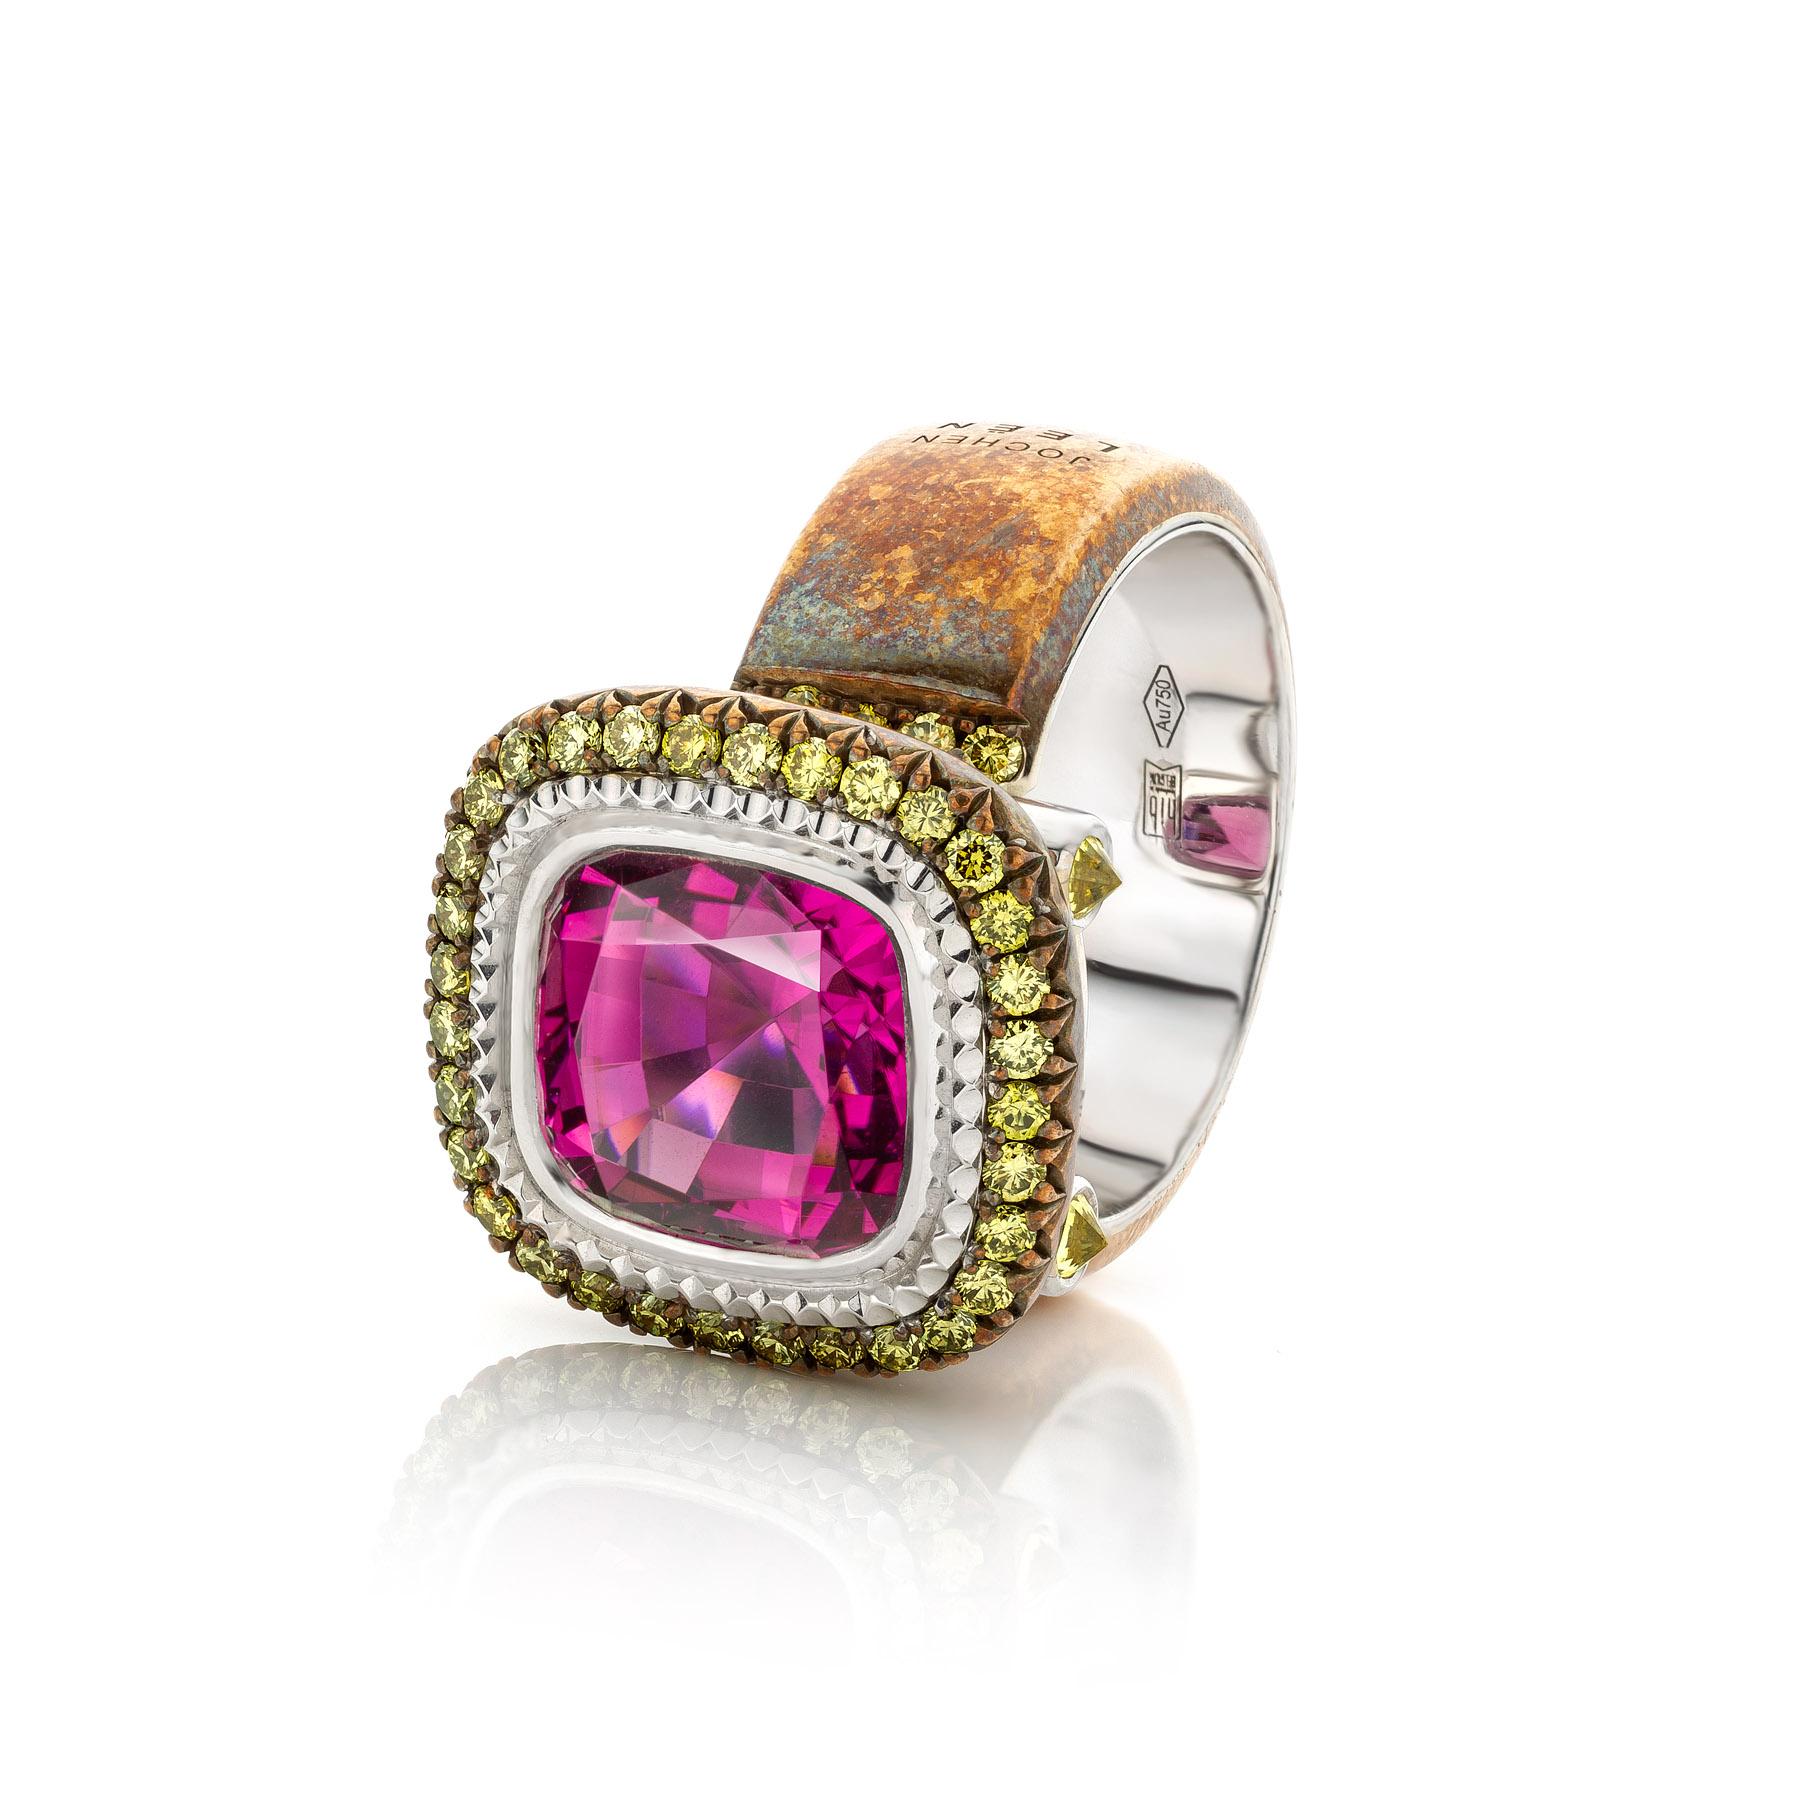 18K White Gold & Bronze 4.2 Carat Pink Tourmaline Cocktail Ring by Jochen Leën In New Condition For Sale In Antwerp, BE